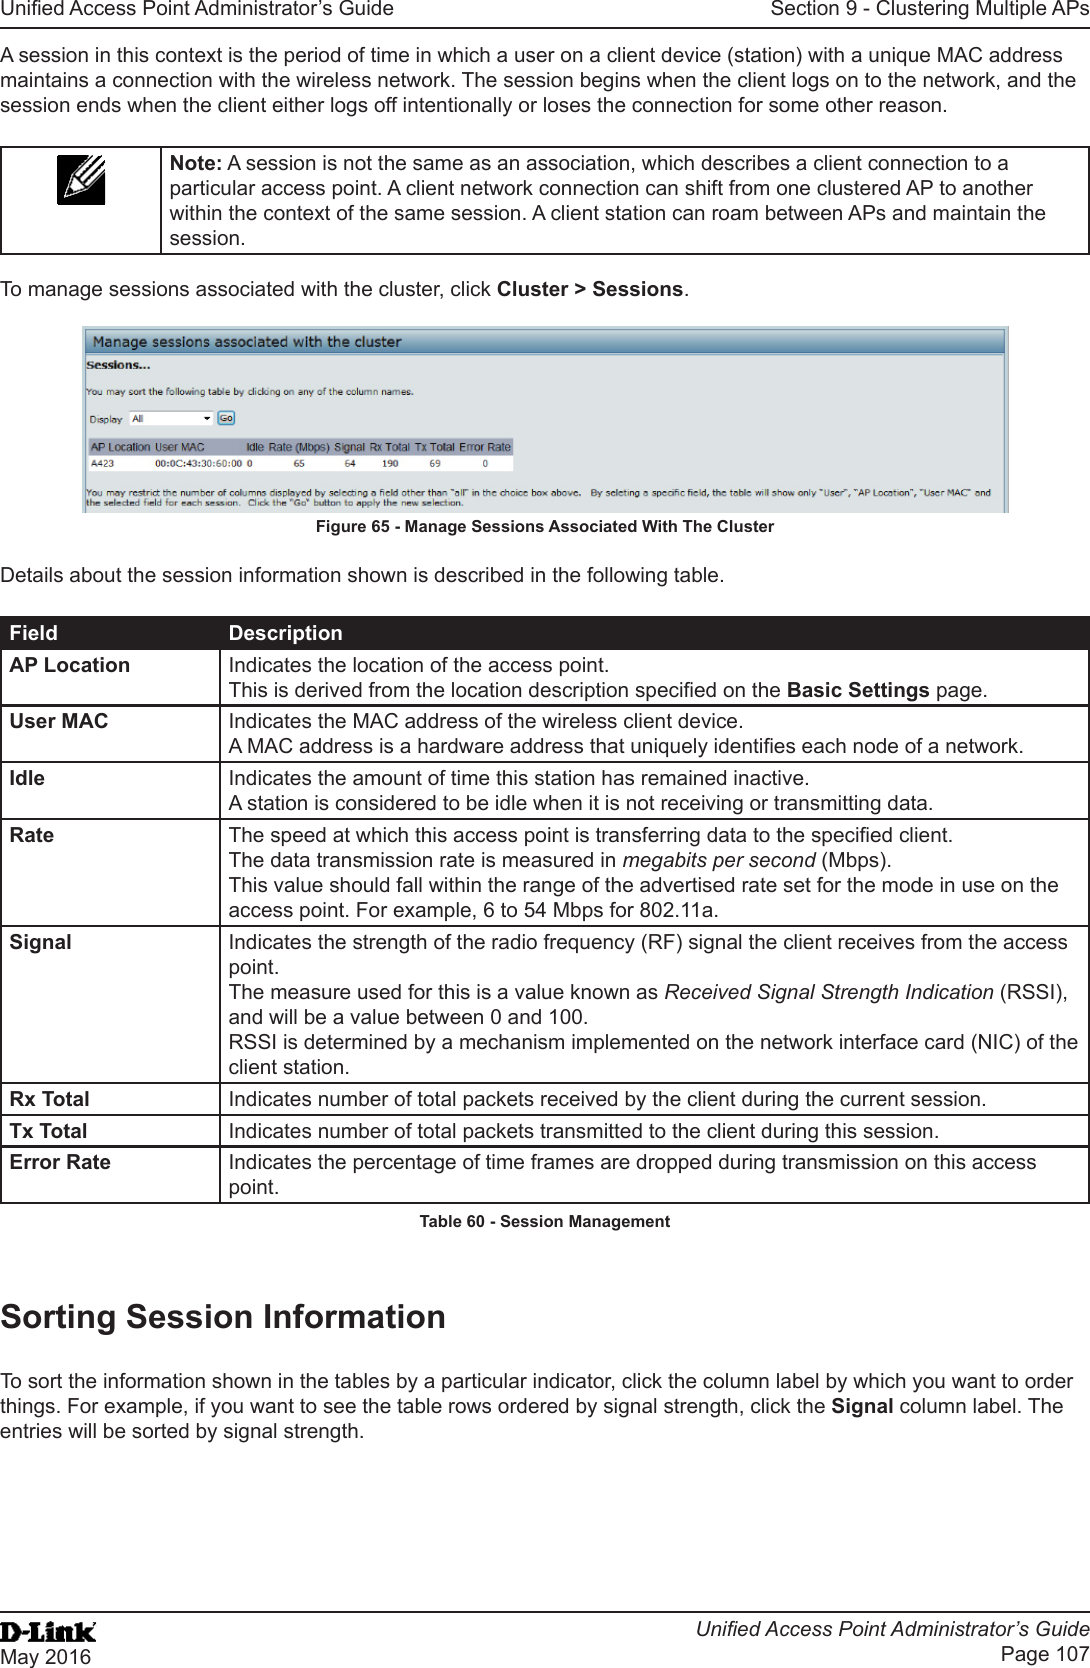 Unied Access Point Administrator’s GuideUnied Access Point Administrator’s GuidePage 107May 2016Section 9 - Clustering Multiple APsA session in this context is the period of time in which a user on a client device (station) with a unique MAC address maintains a connection with the wireless network. The session begins when the client logs on to the network, and the session ends when the client either logs off intentionally or loses the connection for some other reason.Note: A session is not the same as an association, which describes a client connection to a particular access point. A client network connection can shift from one clustered AP to another within the context of the same session. A client station can roam between APs and maintain the session.To manage sessions associated with the cluster, click Cluster &gt; Sessions.Figure 65 - Manage Sessions Associated With The ClusterDetails about the session information shown is described in the following table.Field DescriptionAP Location Indicates the location of the access point.This is derived from the location description specied on the Basic Settings page.User MAC Indicates the MAC address of the wireless client device.A MAC address is a hardware address that uniquely identies each node of a network.Idle Indicates the amount of time this station has remained inactive.A station is considered to be idle when it is not receiving or transmitting data.Rate The speed at which this access point is transferring data to the specied client.The data transmission rate is measured in megabits per second (Mbps).This value should fall within the range of the advertised rate set for the mode in use on the access point. For example, 6 to 54 Mbps for 802.11a.Signal Indicates the strength of the radio frequency (RF) signal the client receives from the access point.The measure used for this is a value known as Received Signal Strength Indication (RSSI), and will be a value between 0 and 100.RSSI is determined by a mechanism implemented on the network interface card (NIC) of the client station.Rx Total Indicates number of total packets received by the client during the current session.Tx Total Indicates number of total packets transmitted to the client during this session.Error Rate Indicates the percentage of time frames are dropped during transmission on this access point.Table 60 - Session ManagementSorting Session InformationTo sort the information shown in the tables by a particular indicator, click the column label by which you want to order things. For example, if you want to see the table rows ordered by signal strength, click the Signal column label. The entries will be sorted by signal strength.